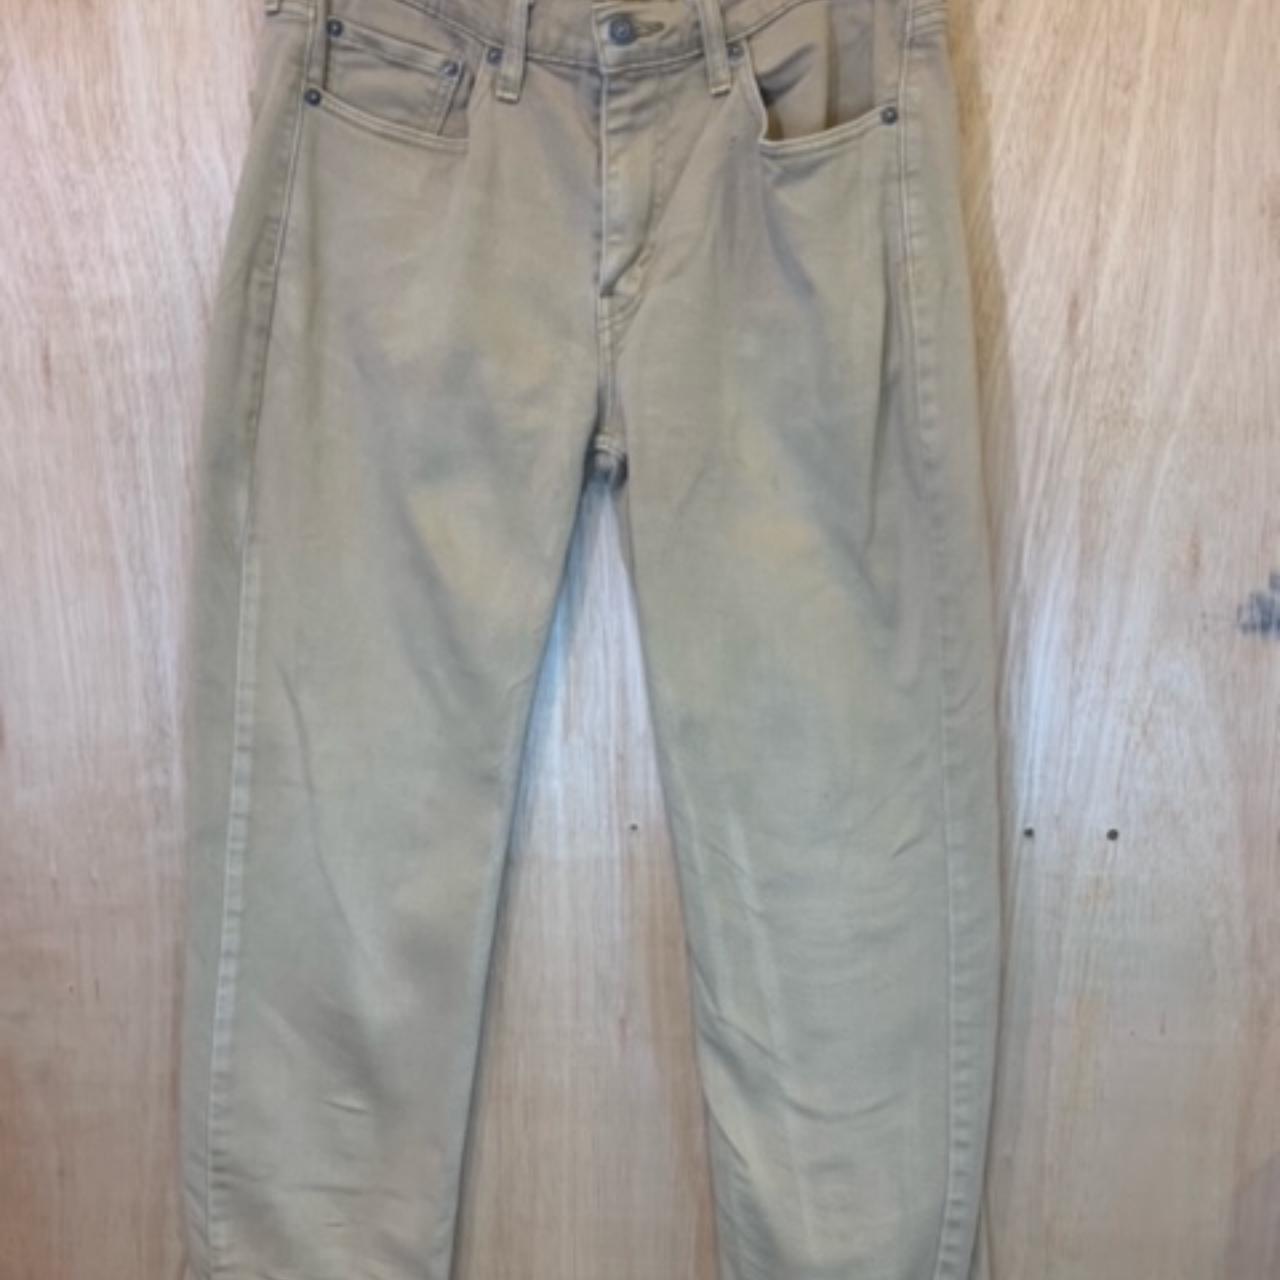 Product Image 2 - Levi's Strauss Co. 514 size